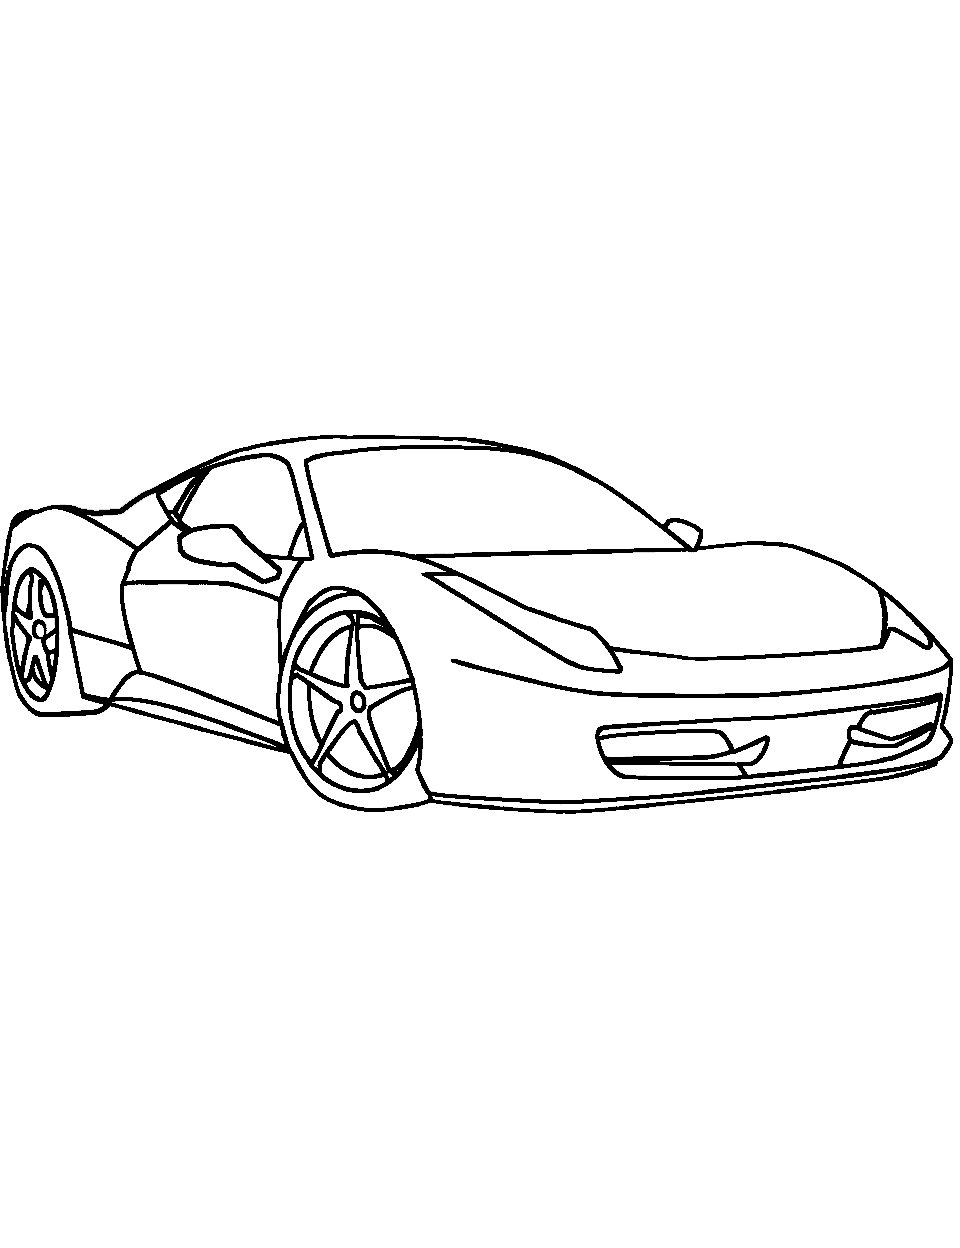 Racing Royalty Race Car Coloring Page - A luxury race car with elegant designs.